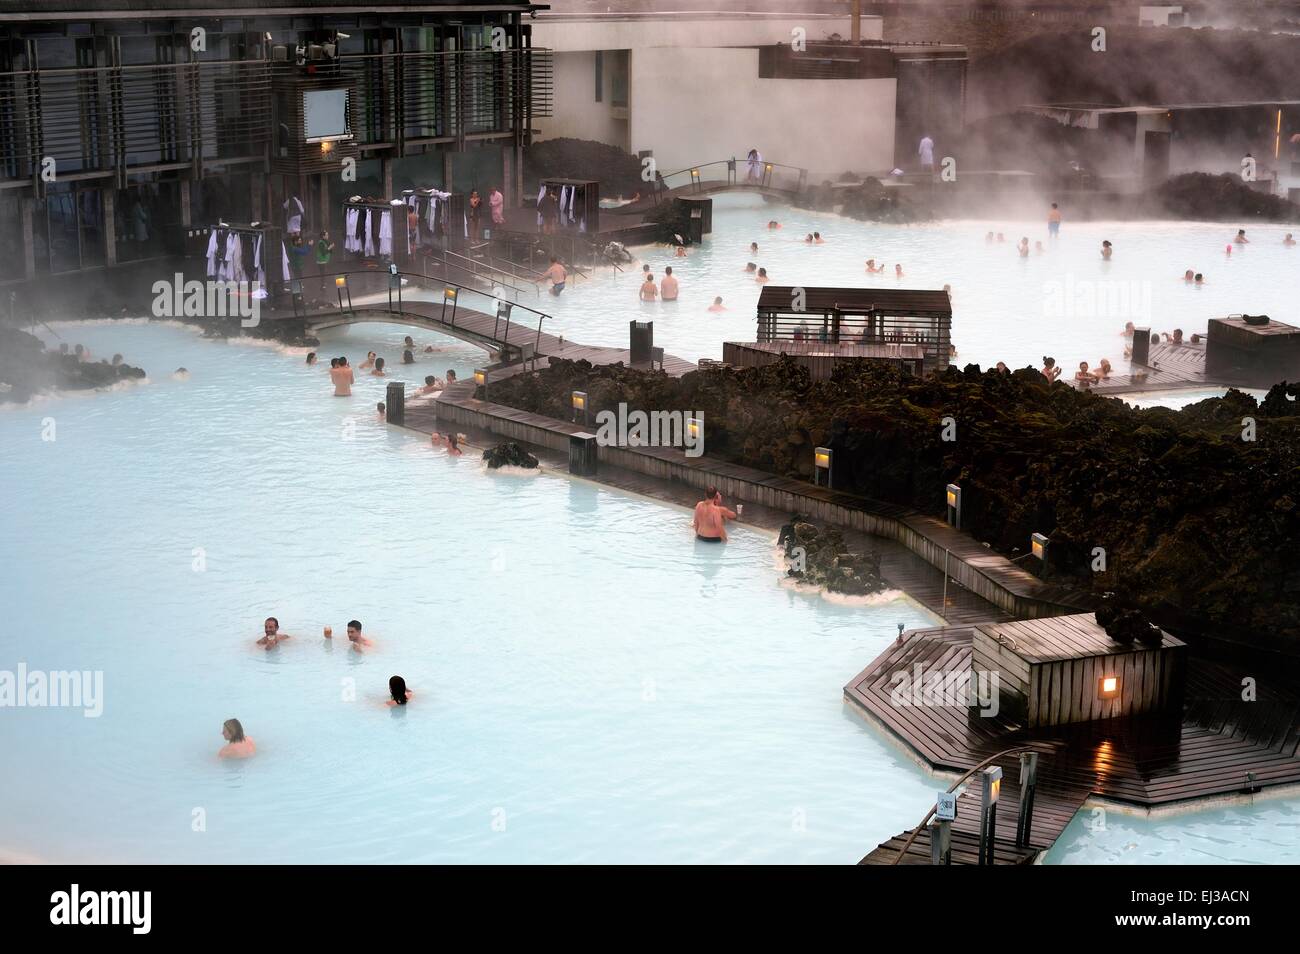 People enjoying a thermal bath at the Blue Lagoon Iceland in winter Stock Photo